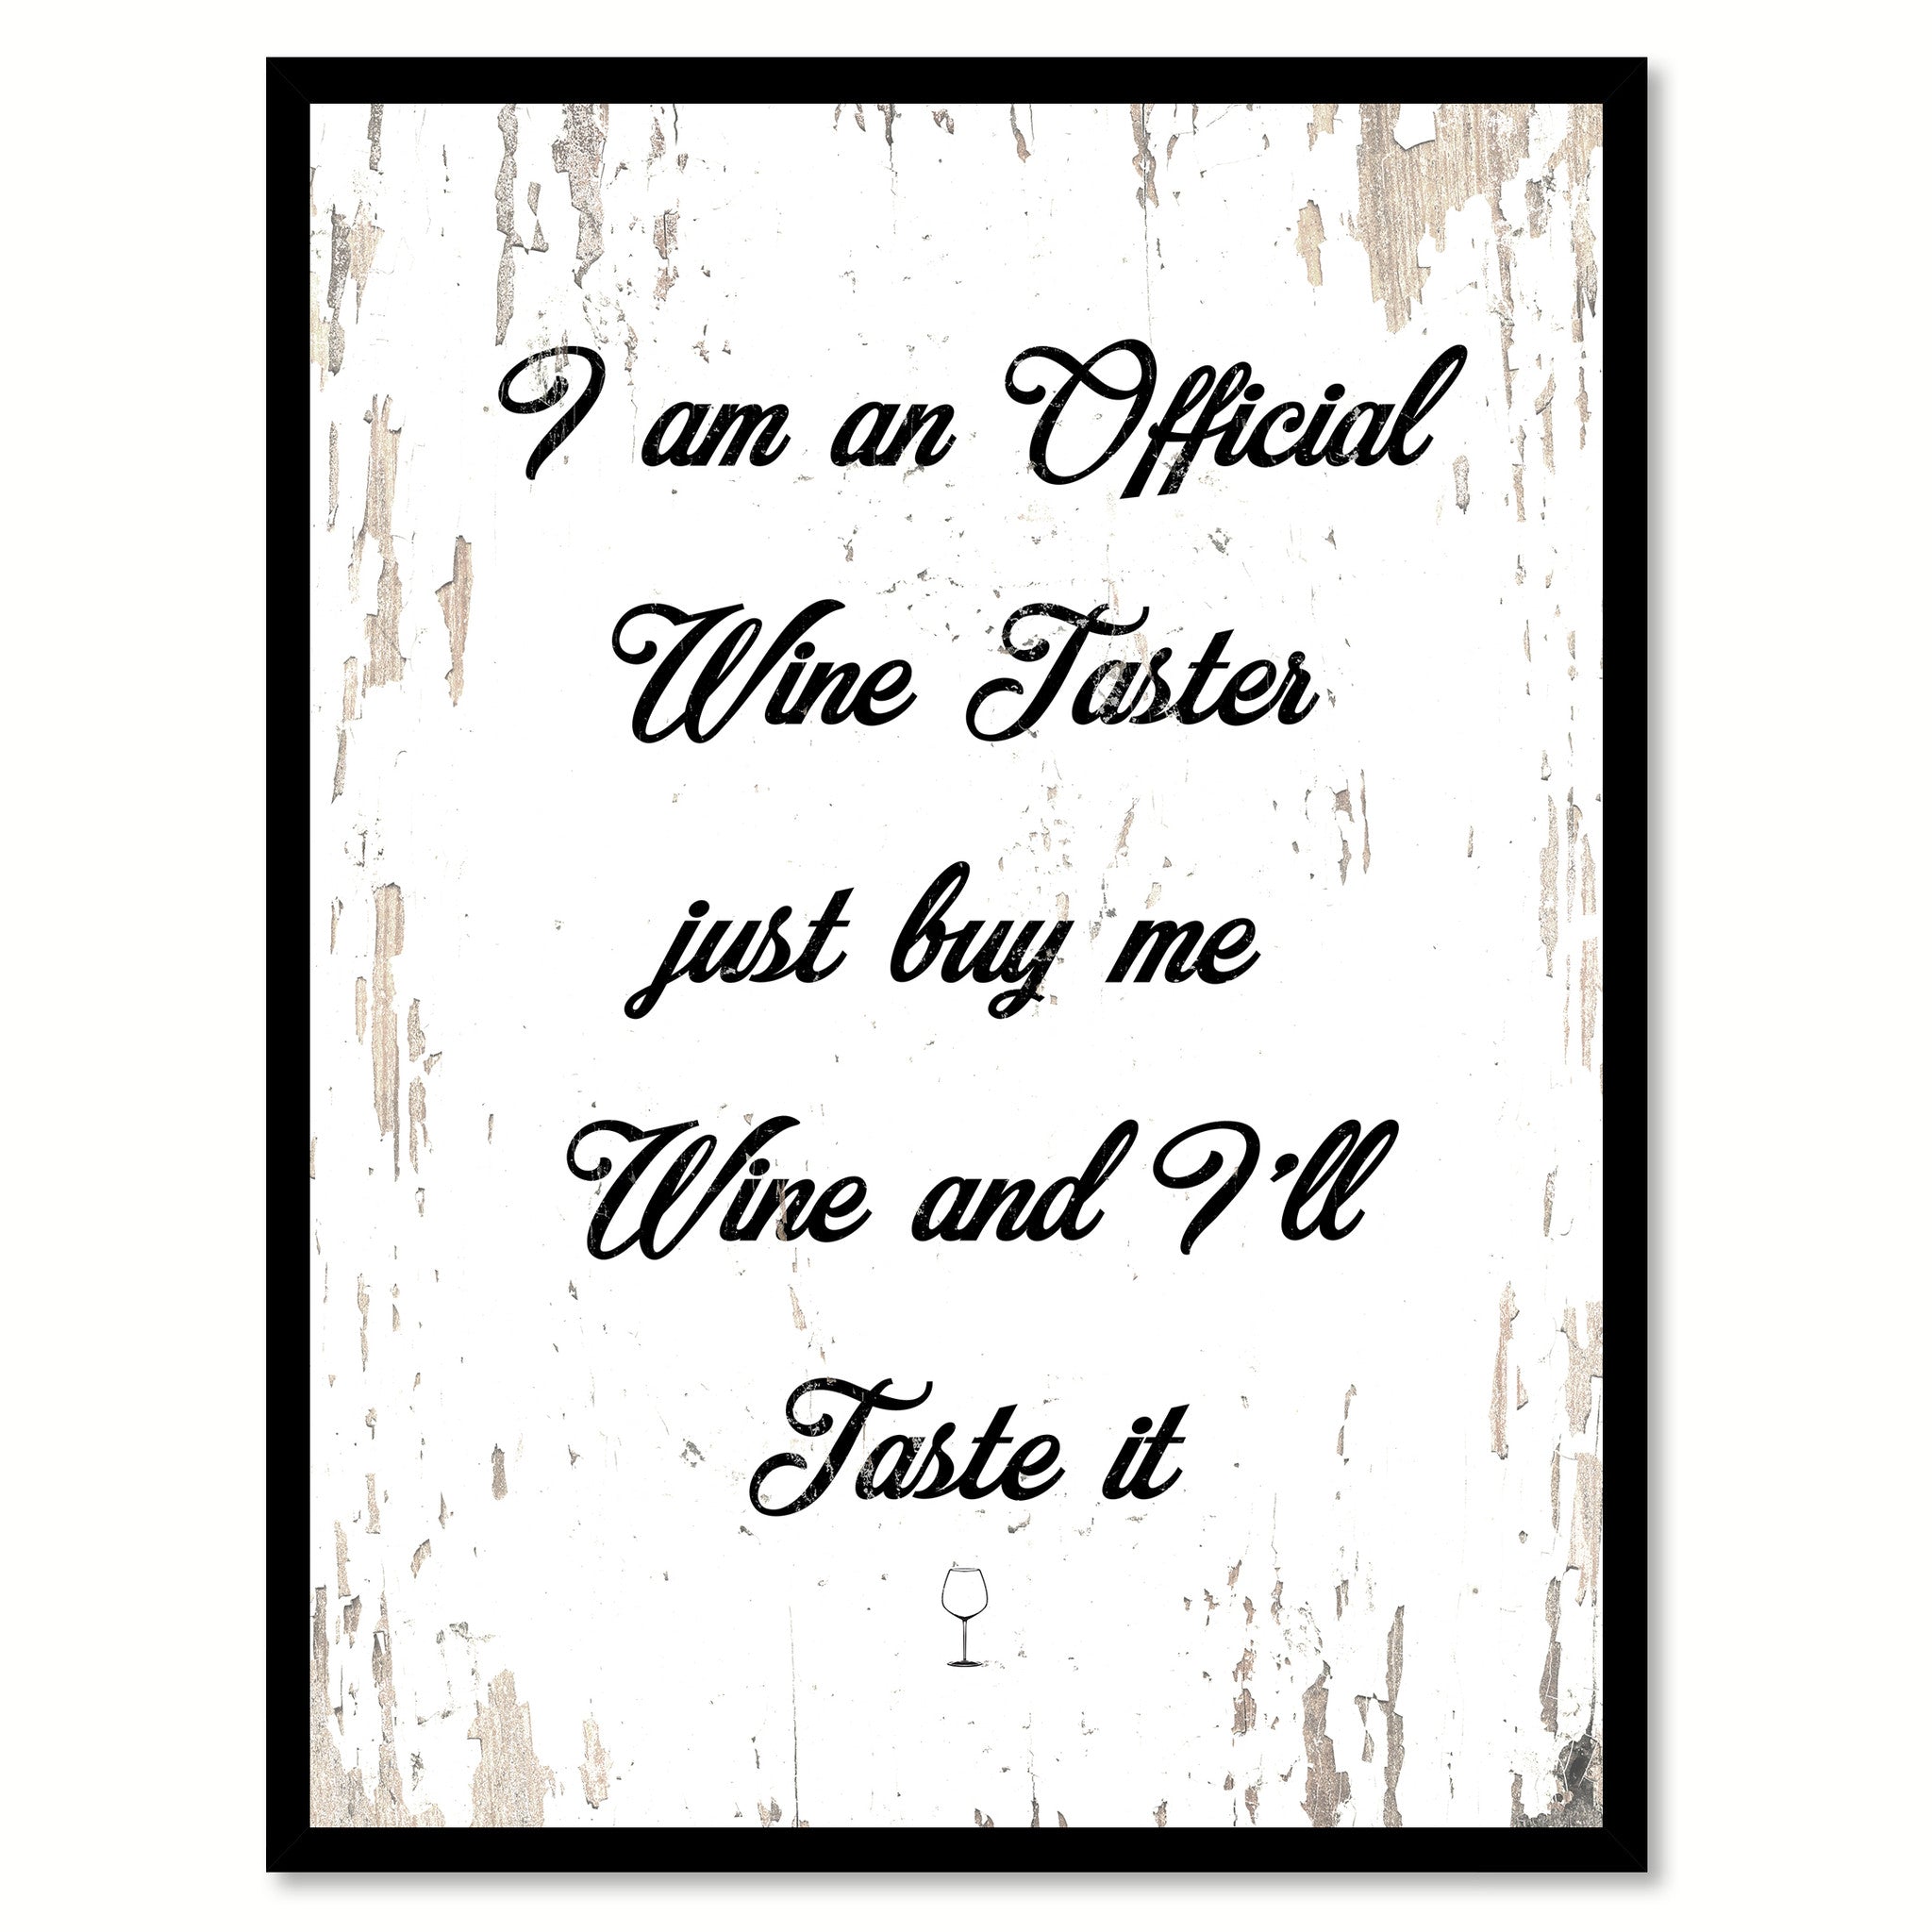 I Am An Official Wine Taster Just Buy Me Wine & I'll Taste It Quote Saying Canvas Print with Picture Frame